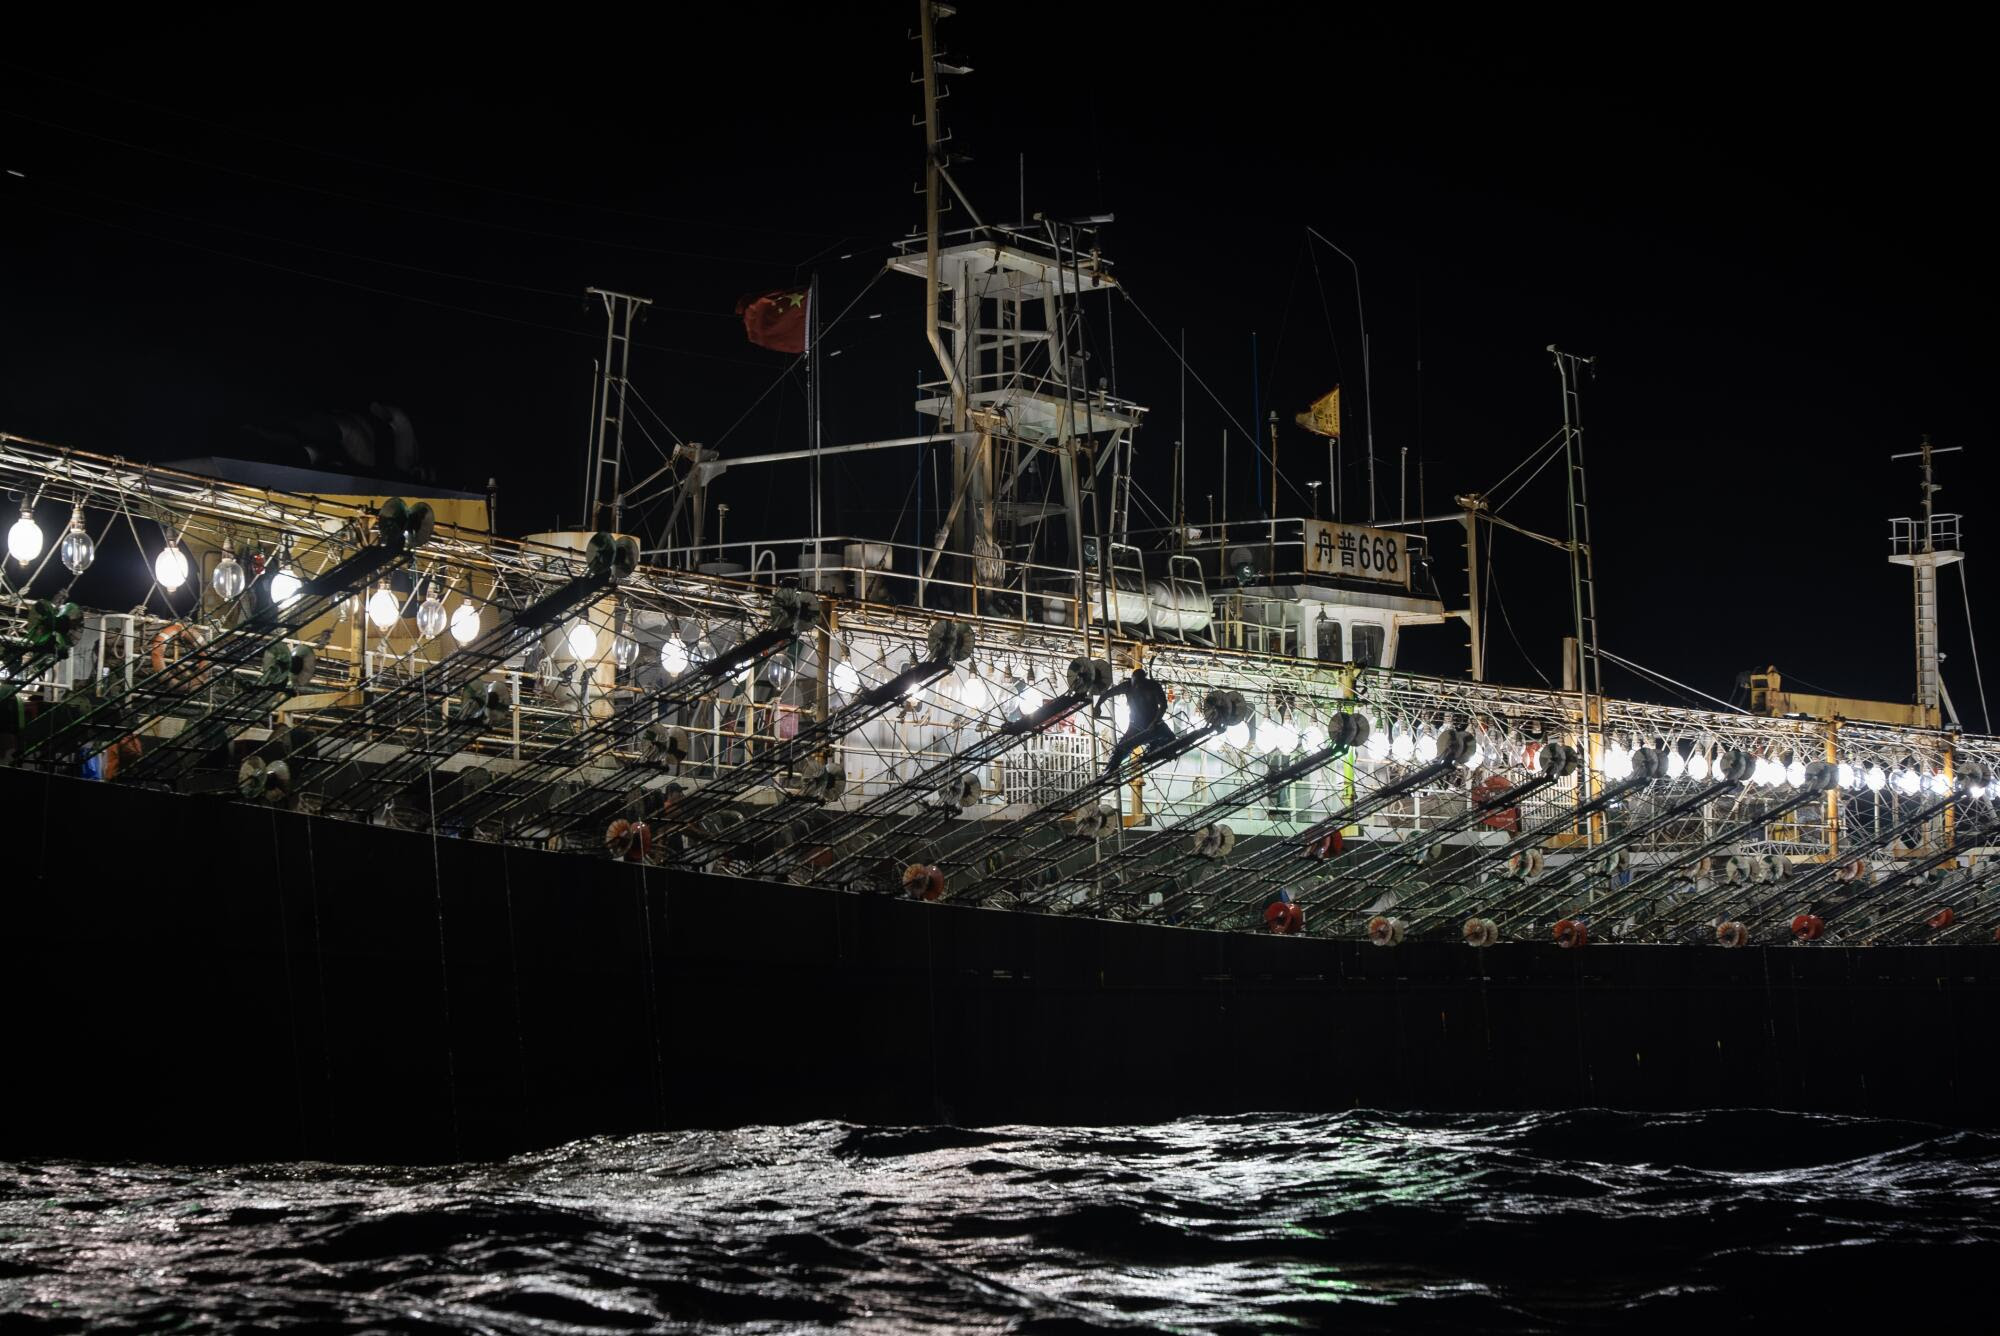 Chinese squid-fishing crews seek to escape beatings and more - Los